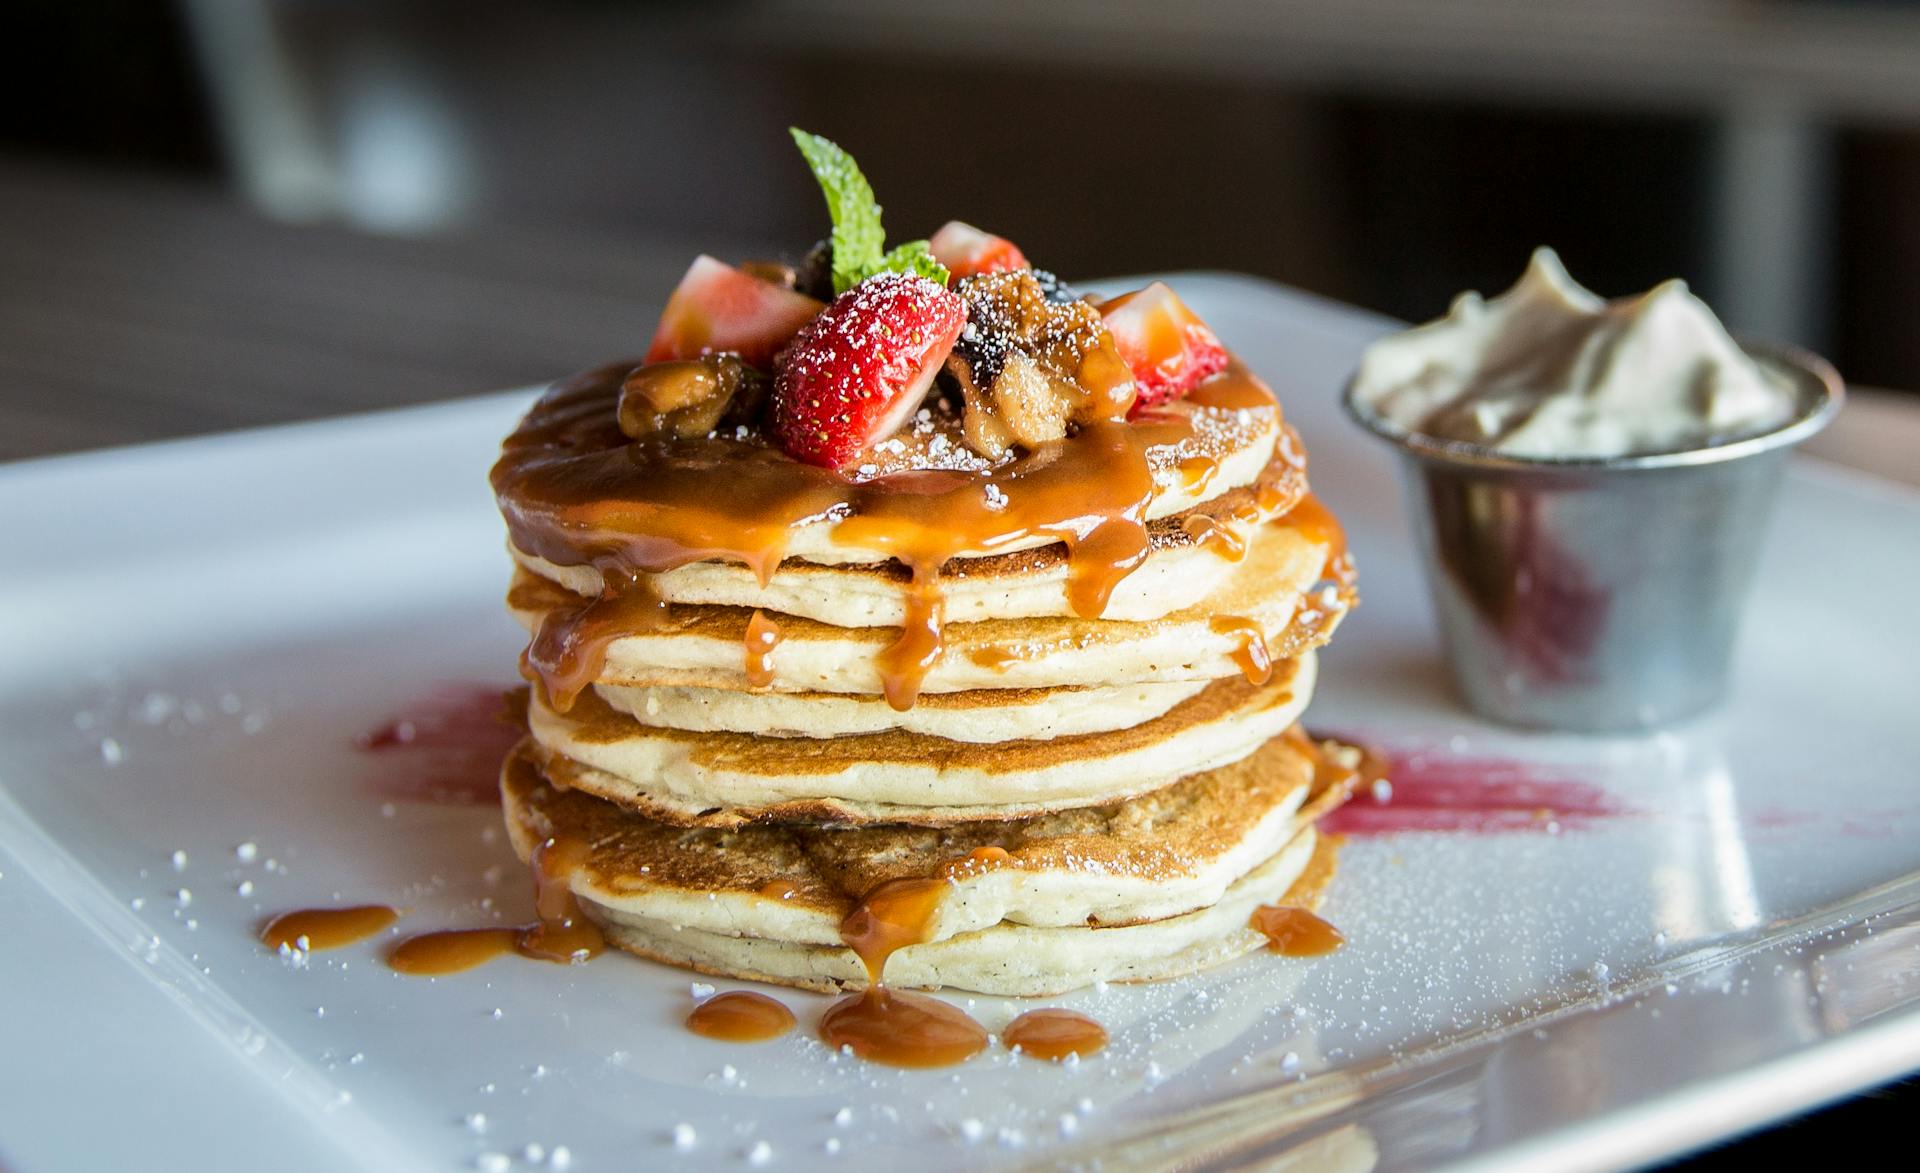 Pancakes served with sliced fruits on top and some cream | Source: Pexels